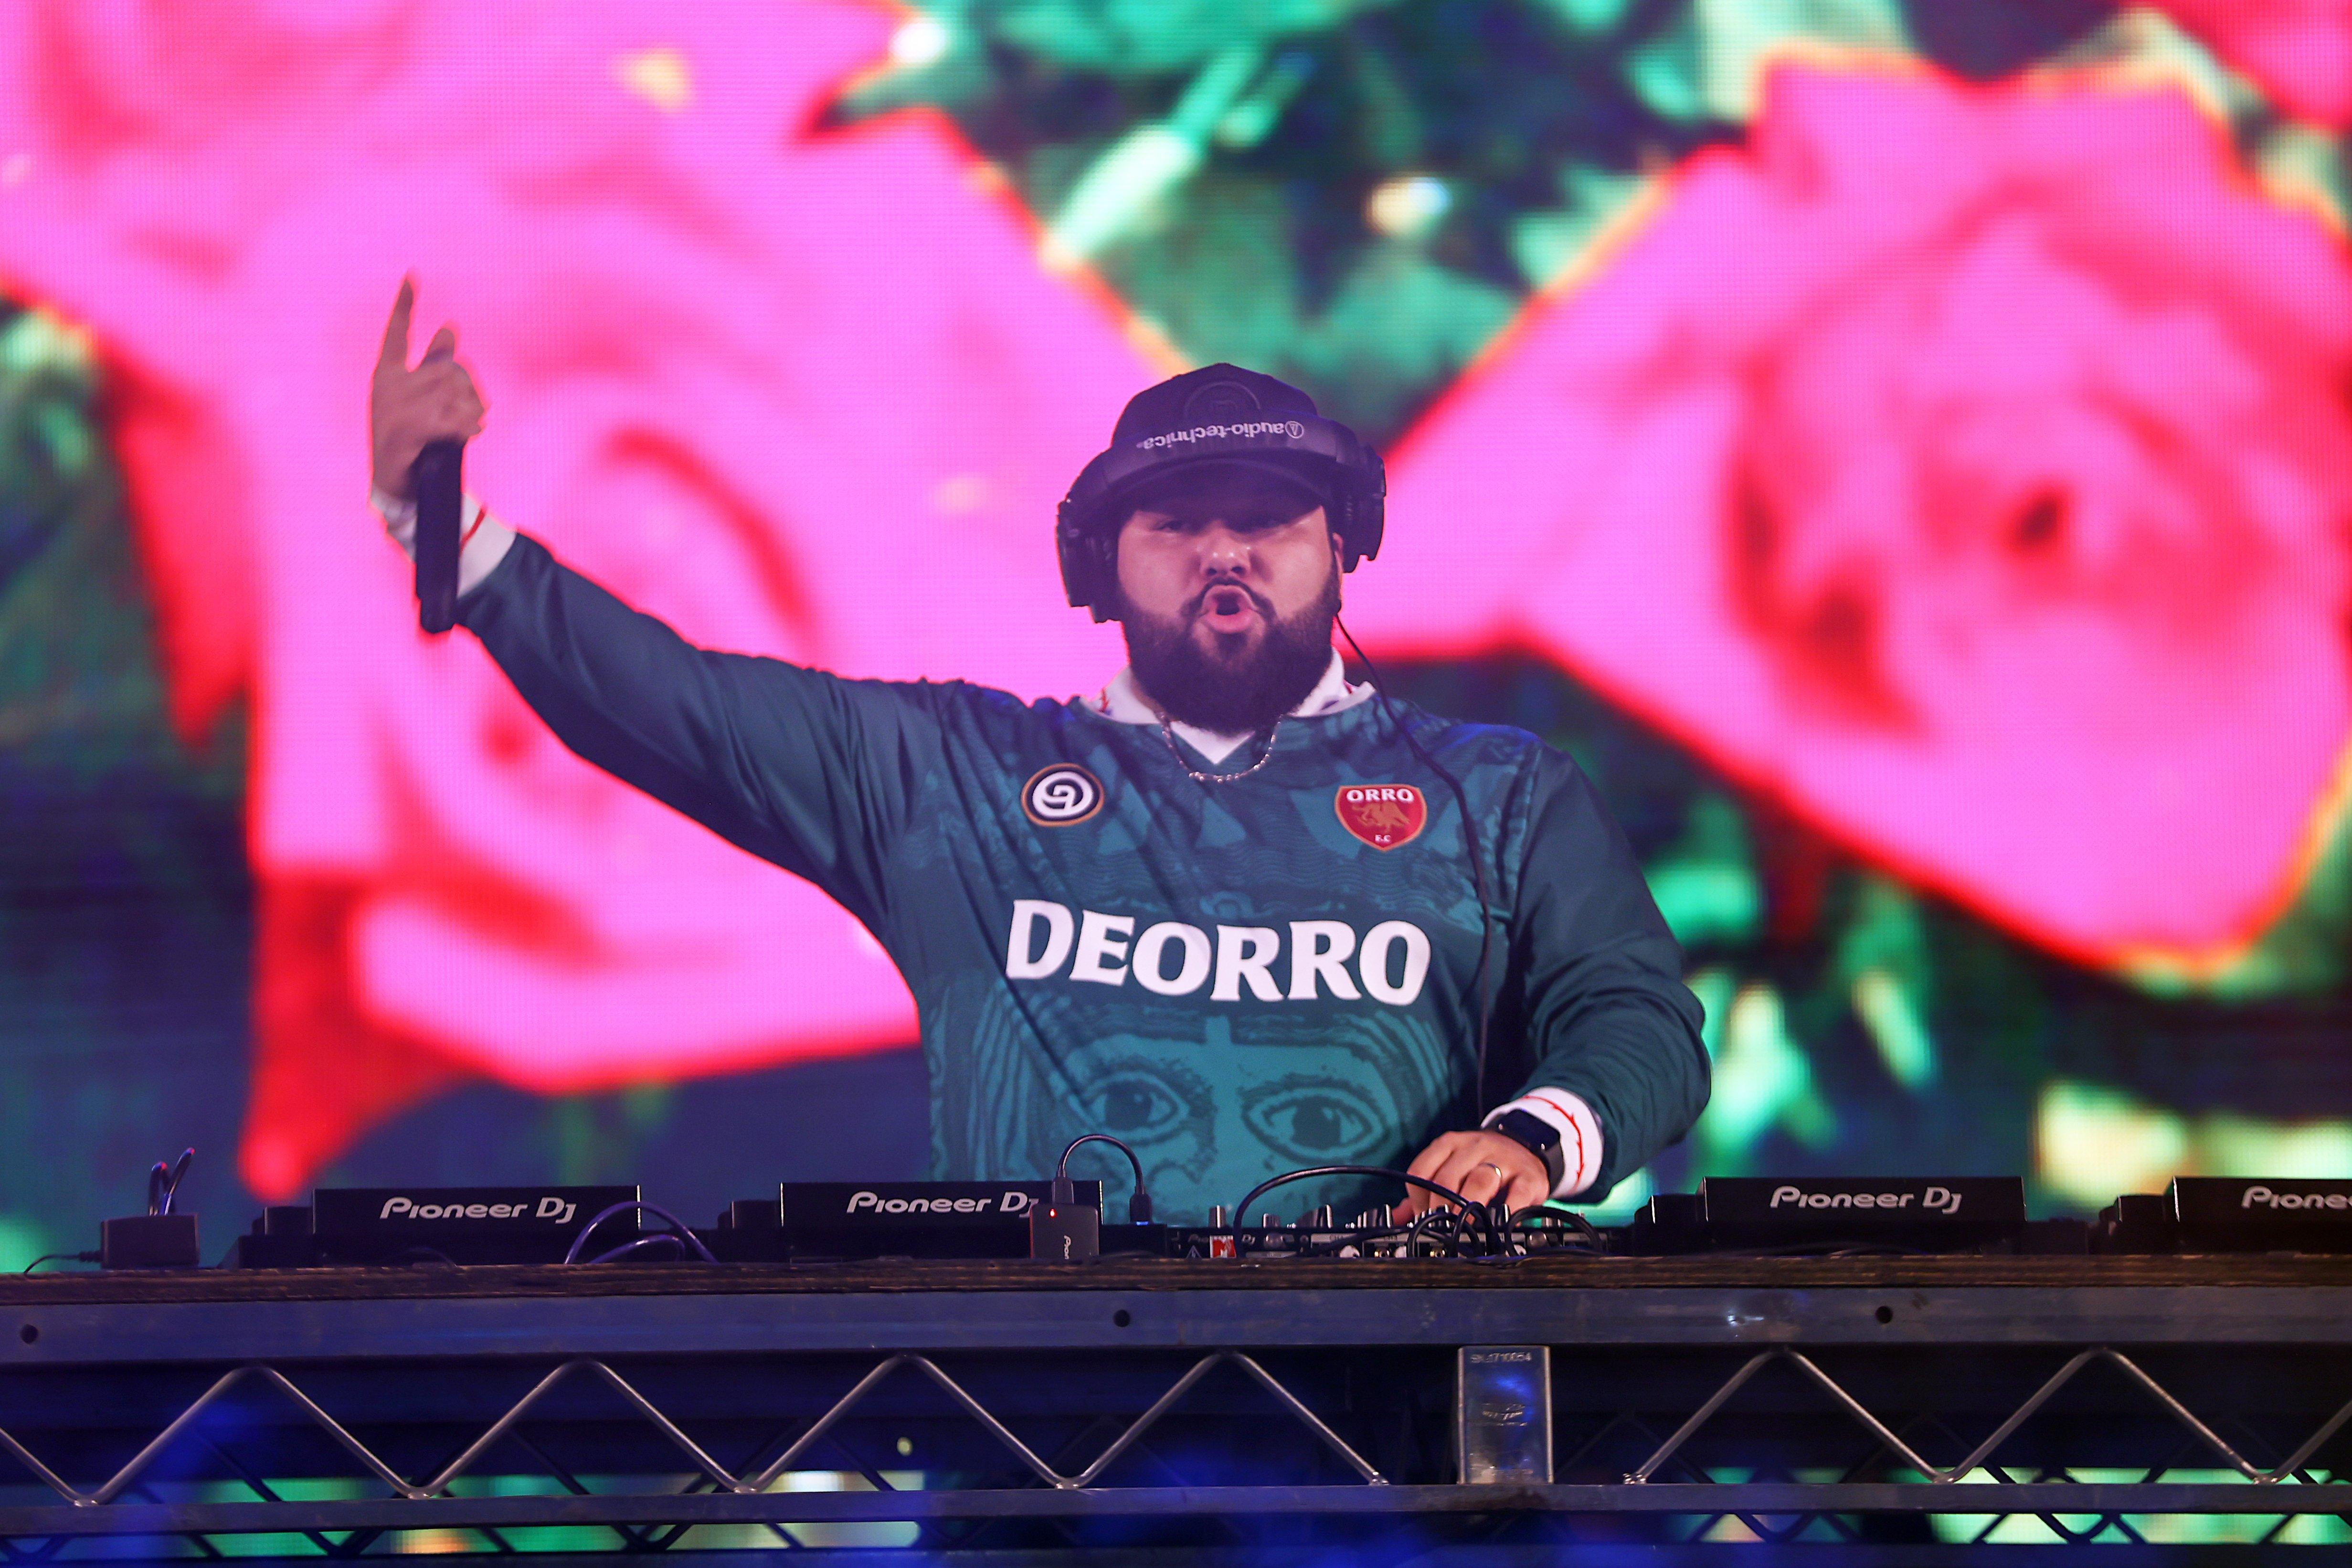 DJ Deorro performs  during the Mextour Live Concert at Los Angeles Memorial Coliseum in Los Angeles in 2023